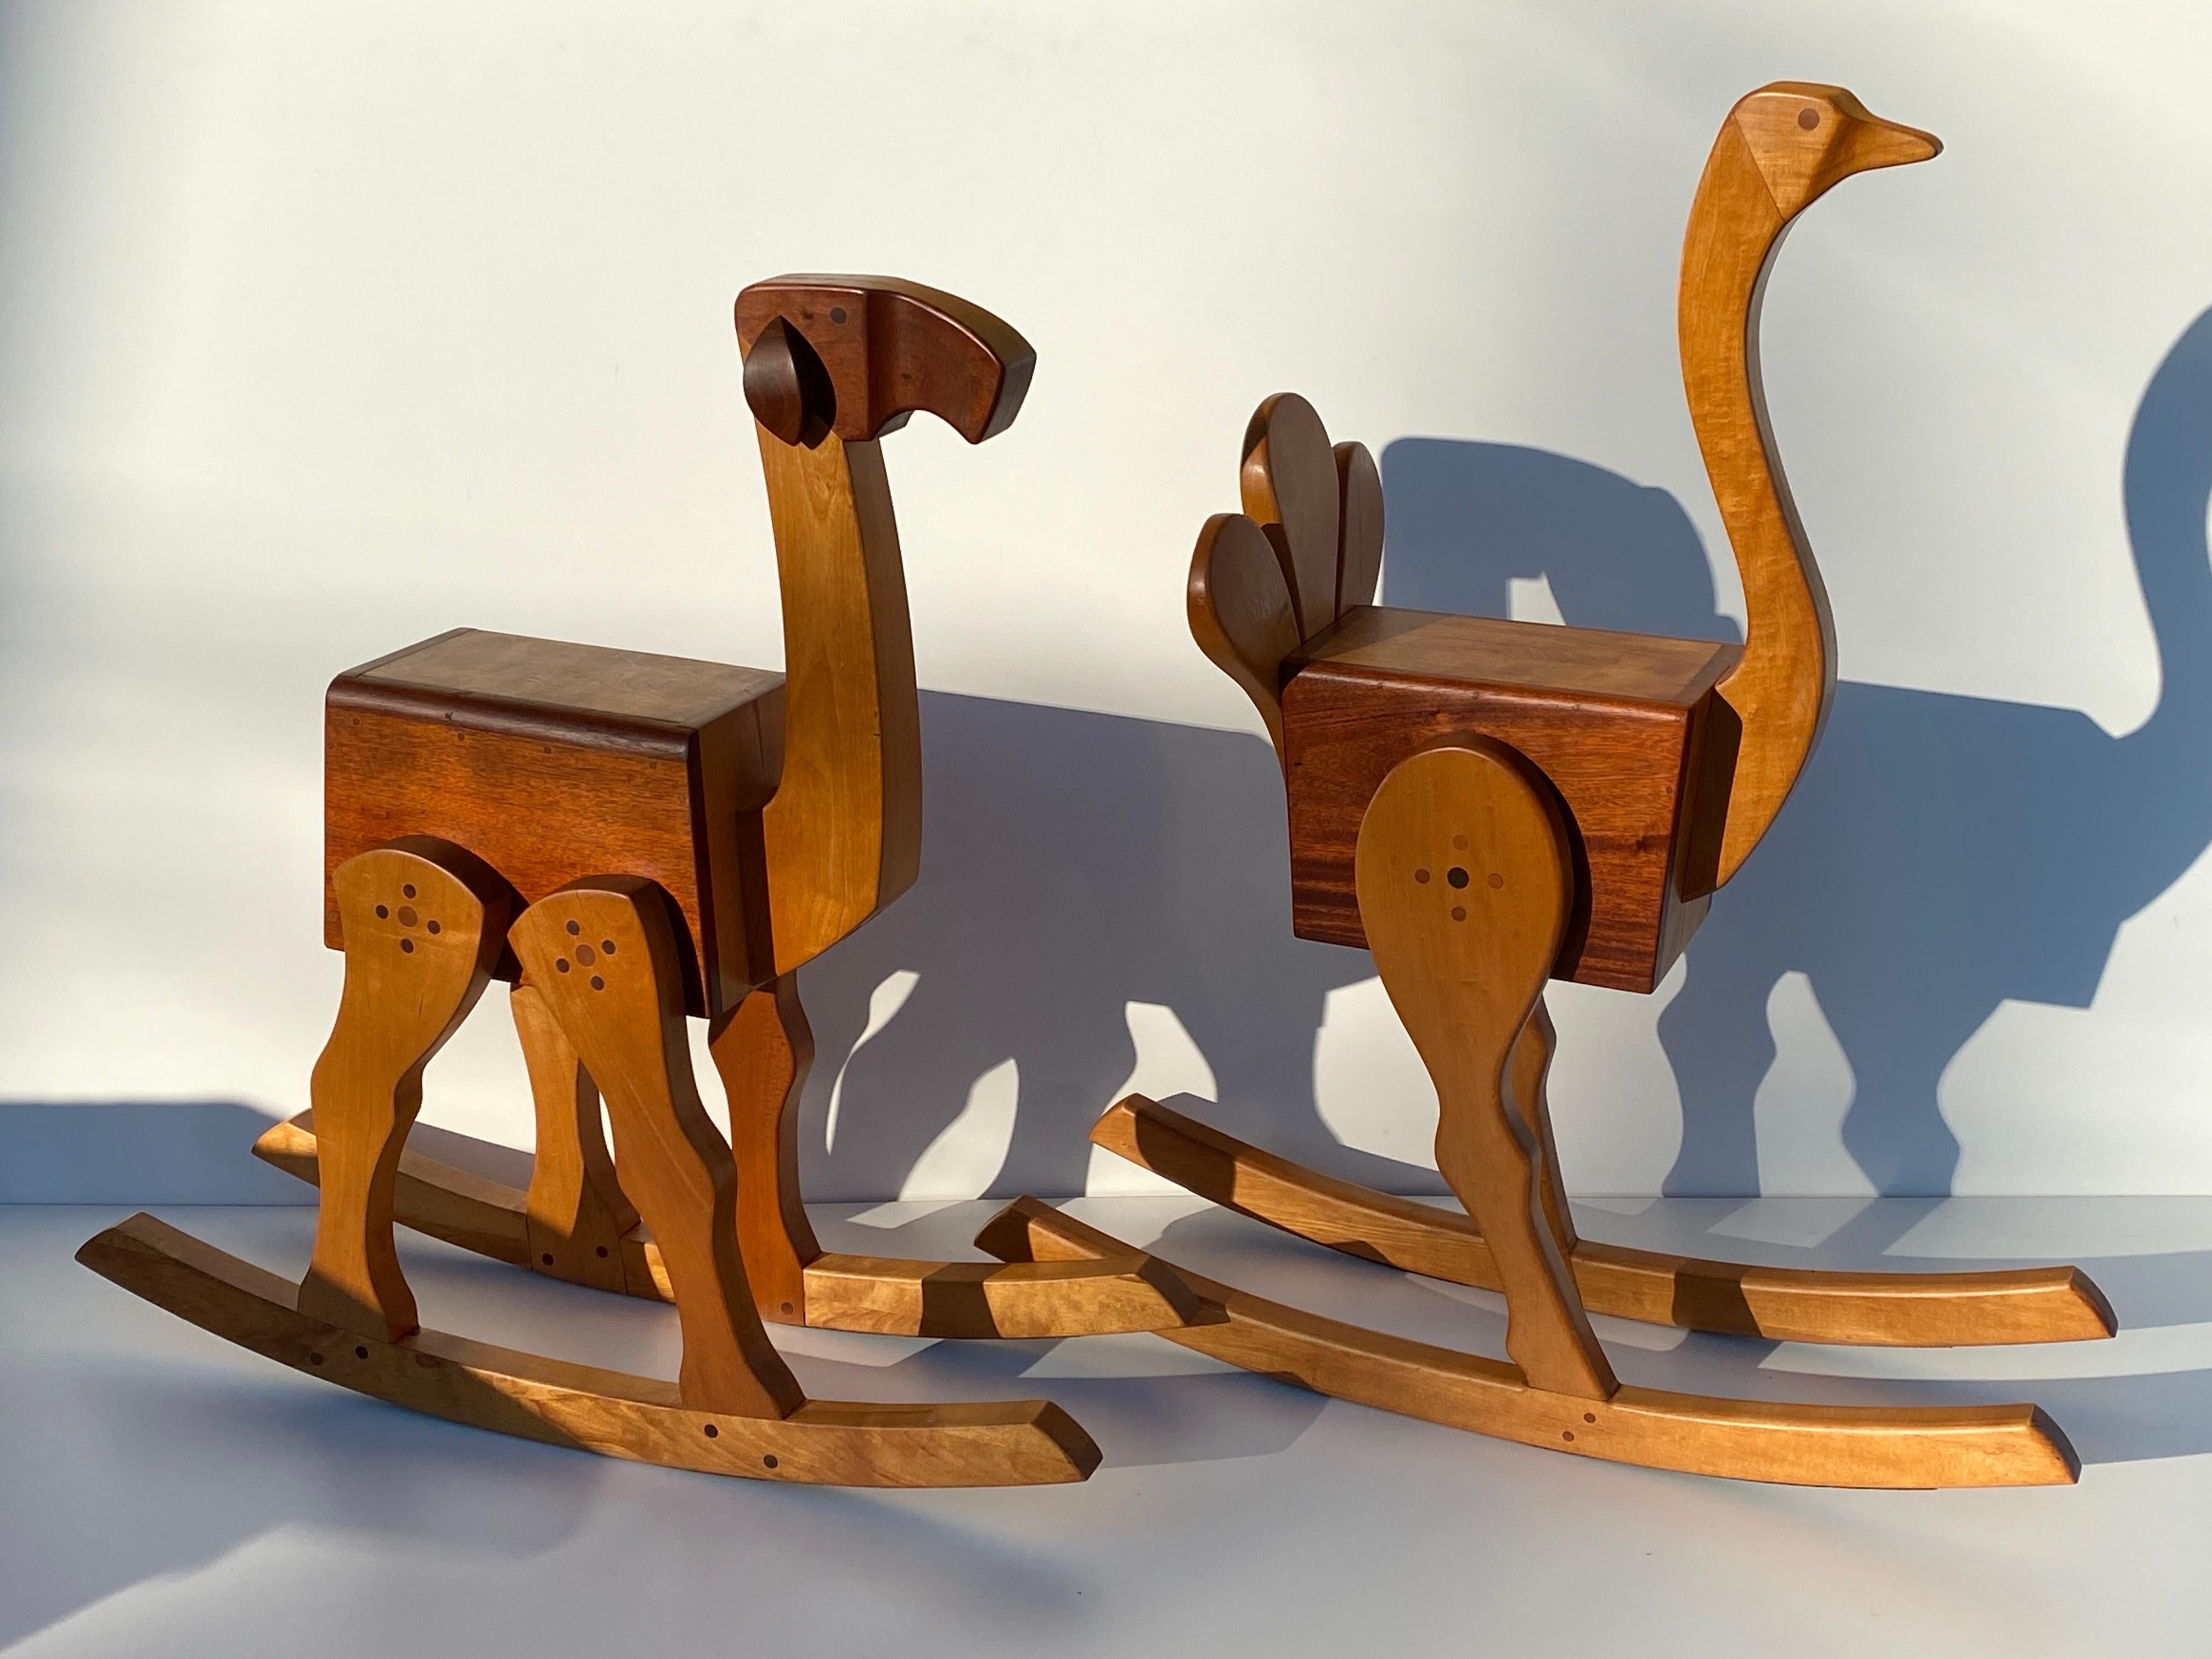 One of a kind set of two ostrich and camel adult size carousel rocking chairs, also can be used as barstools.
Stamped BJ 1979 in the style of Kay Bojesen made of mahogany and white maple. True conversation piece !